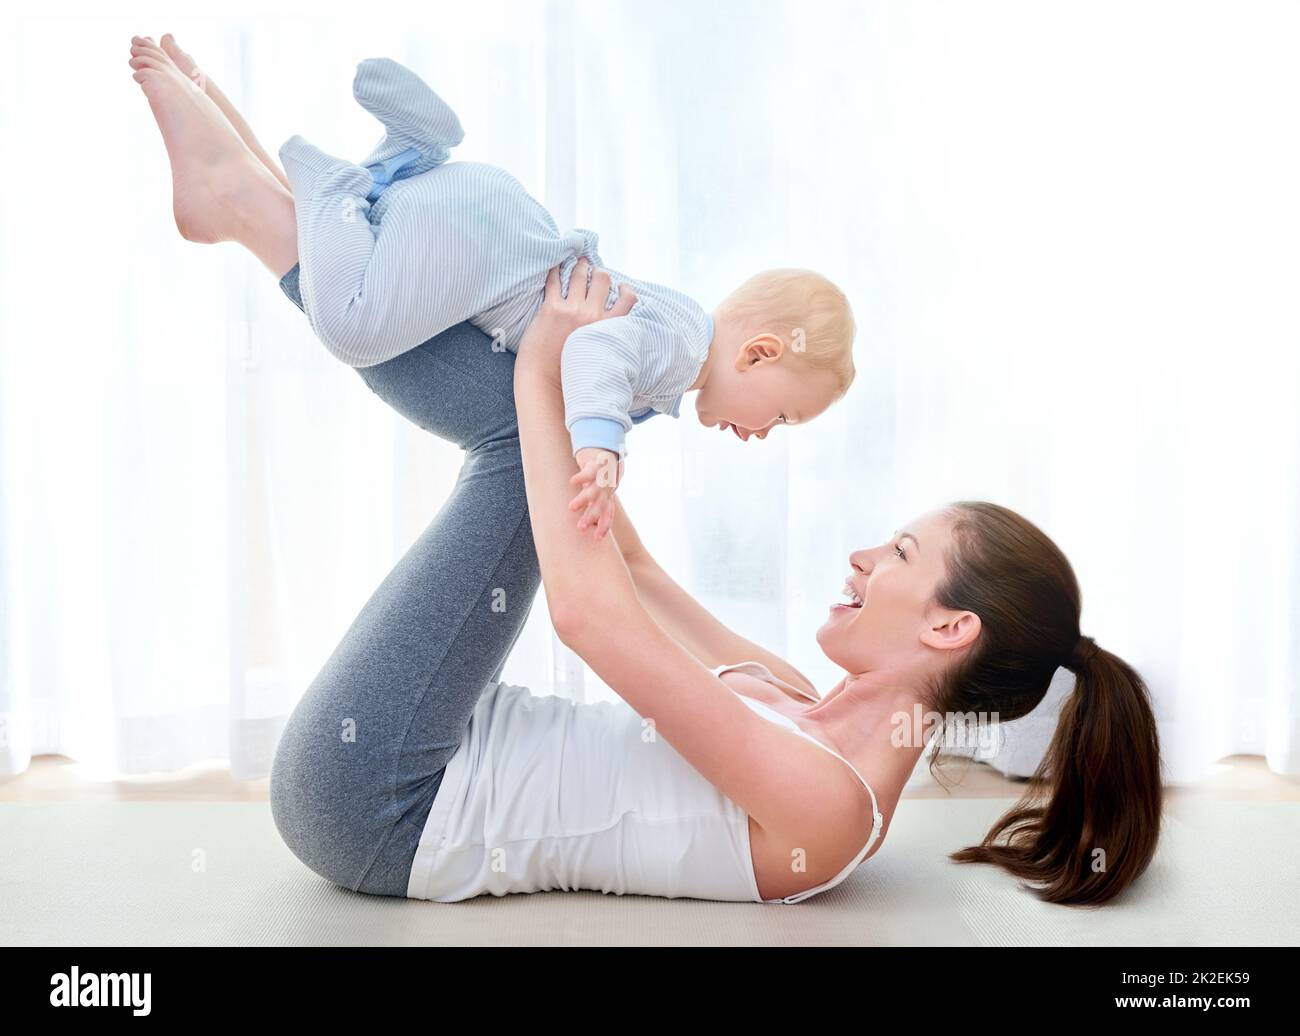 Mommy and me exercises. Shot of a young woman working out while spending time with her baby boy. Stock Photo